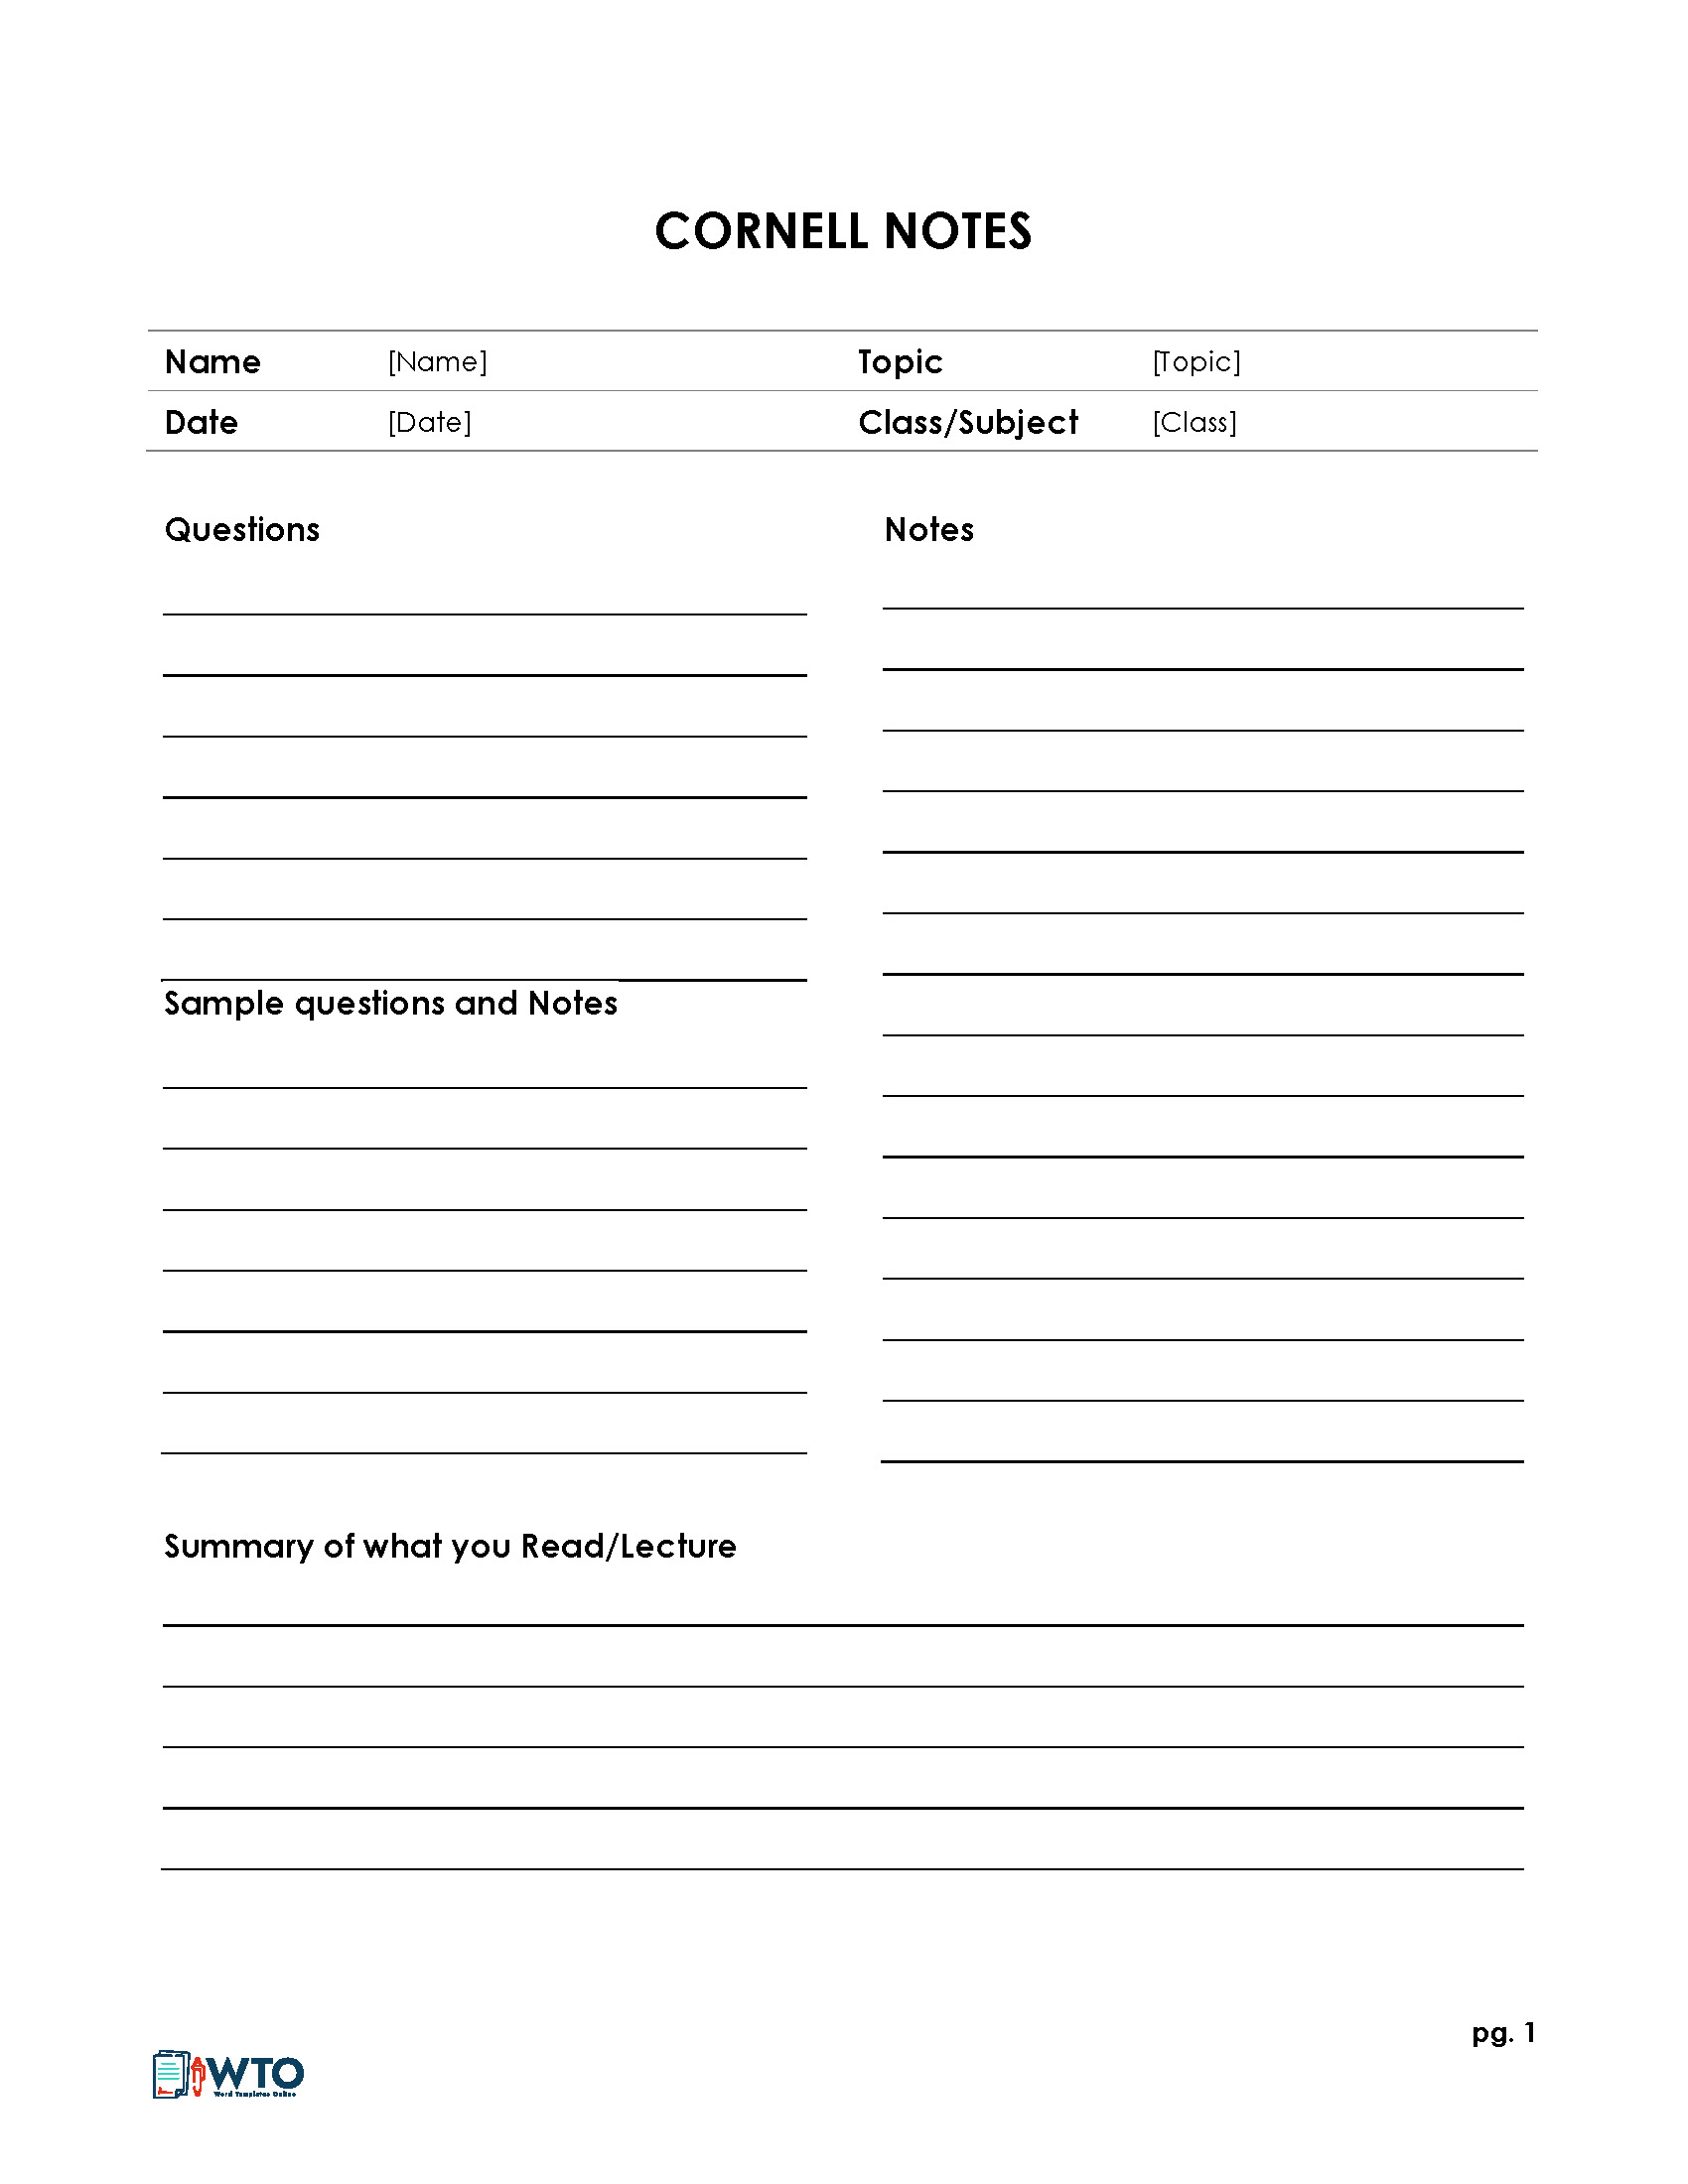 21 Free Cornell Note Templates (Cornell Note Taking Explained) Regarding Novel Notes Template